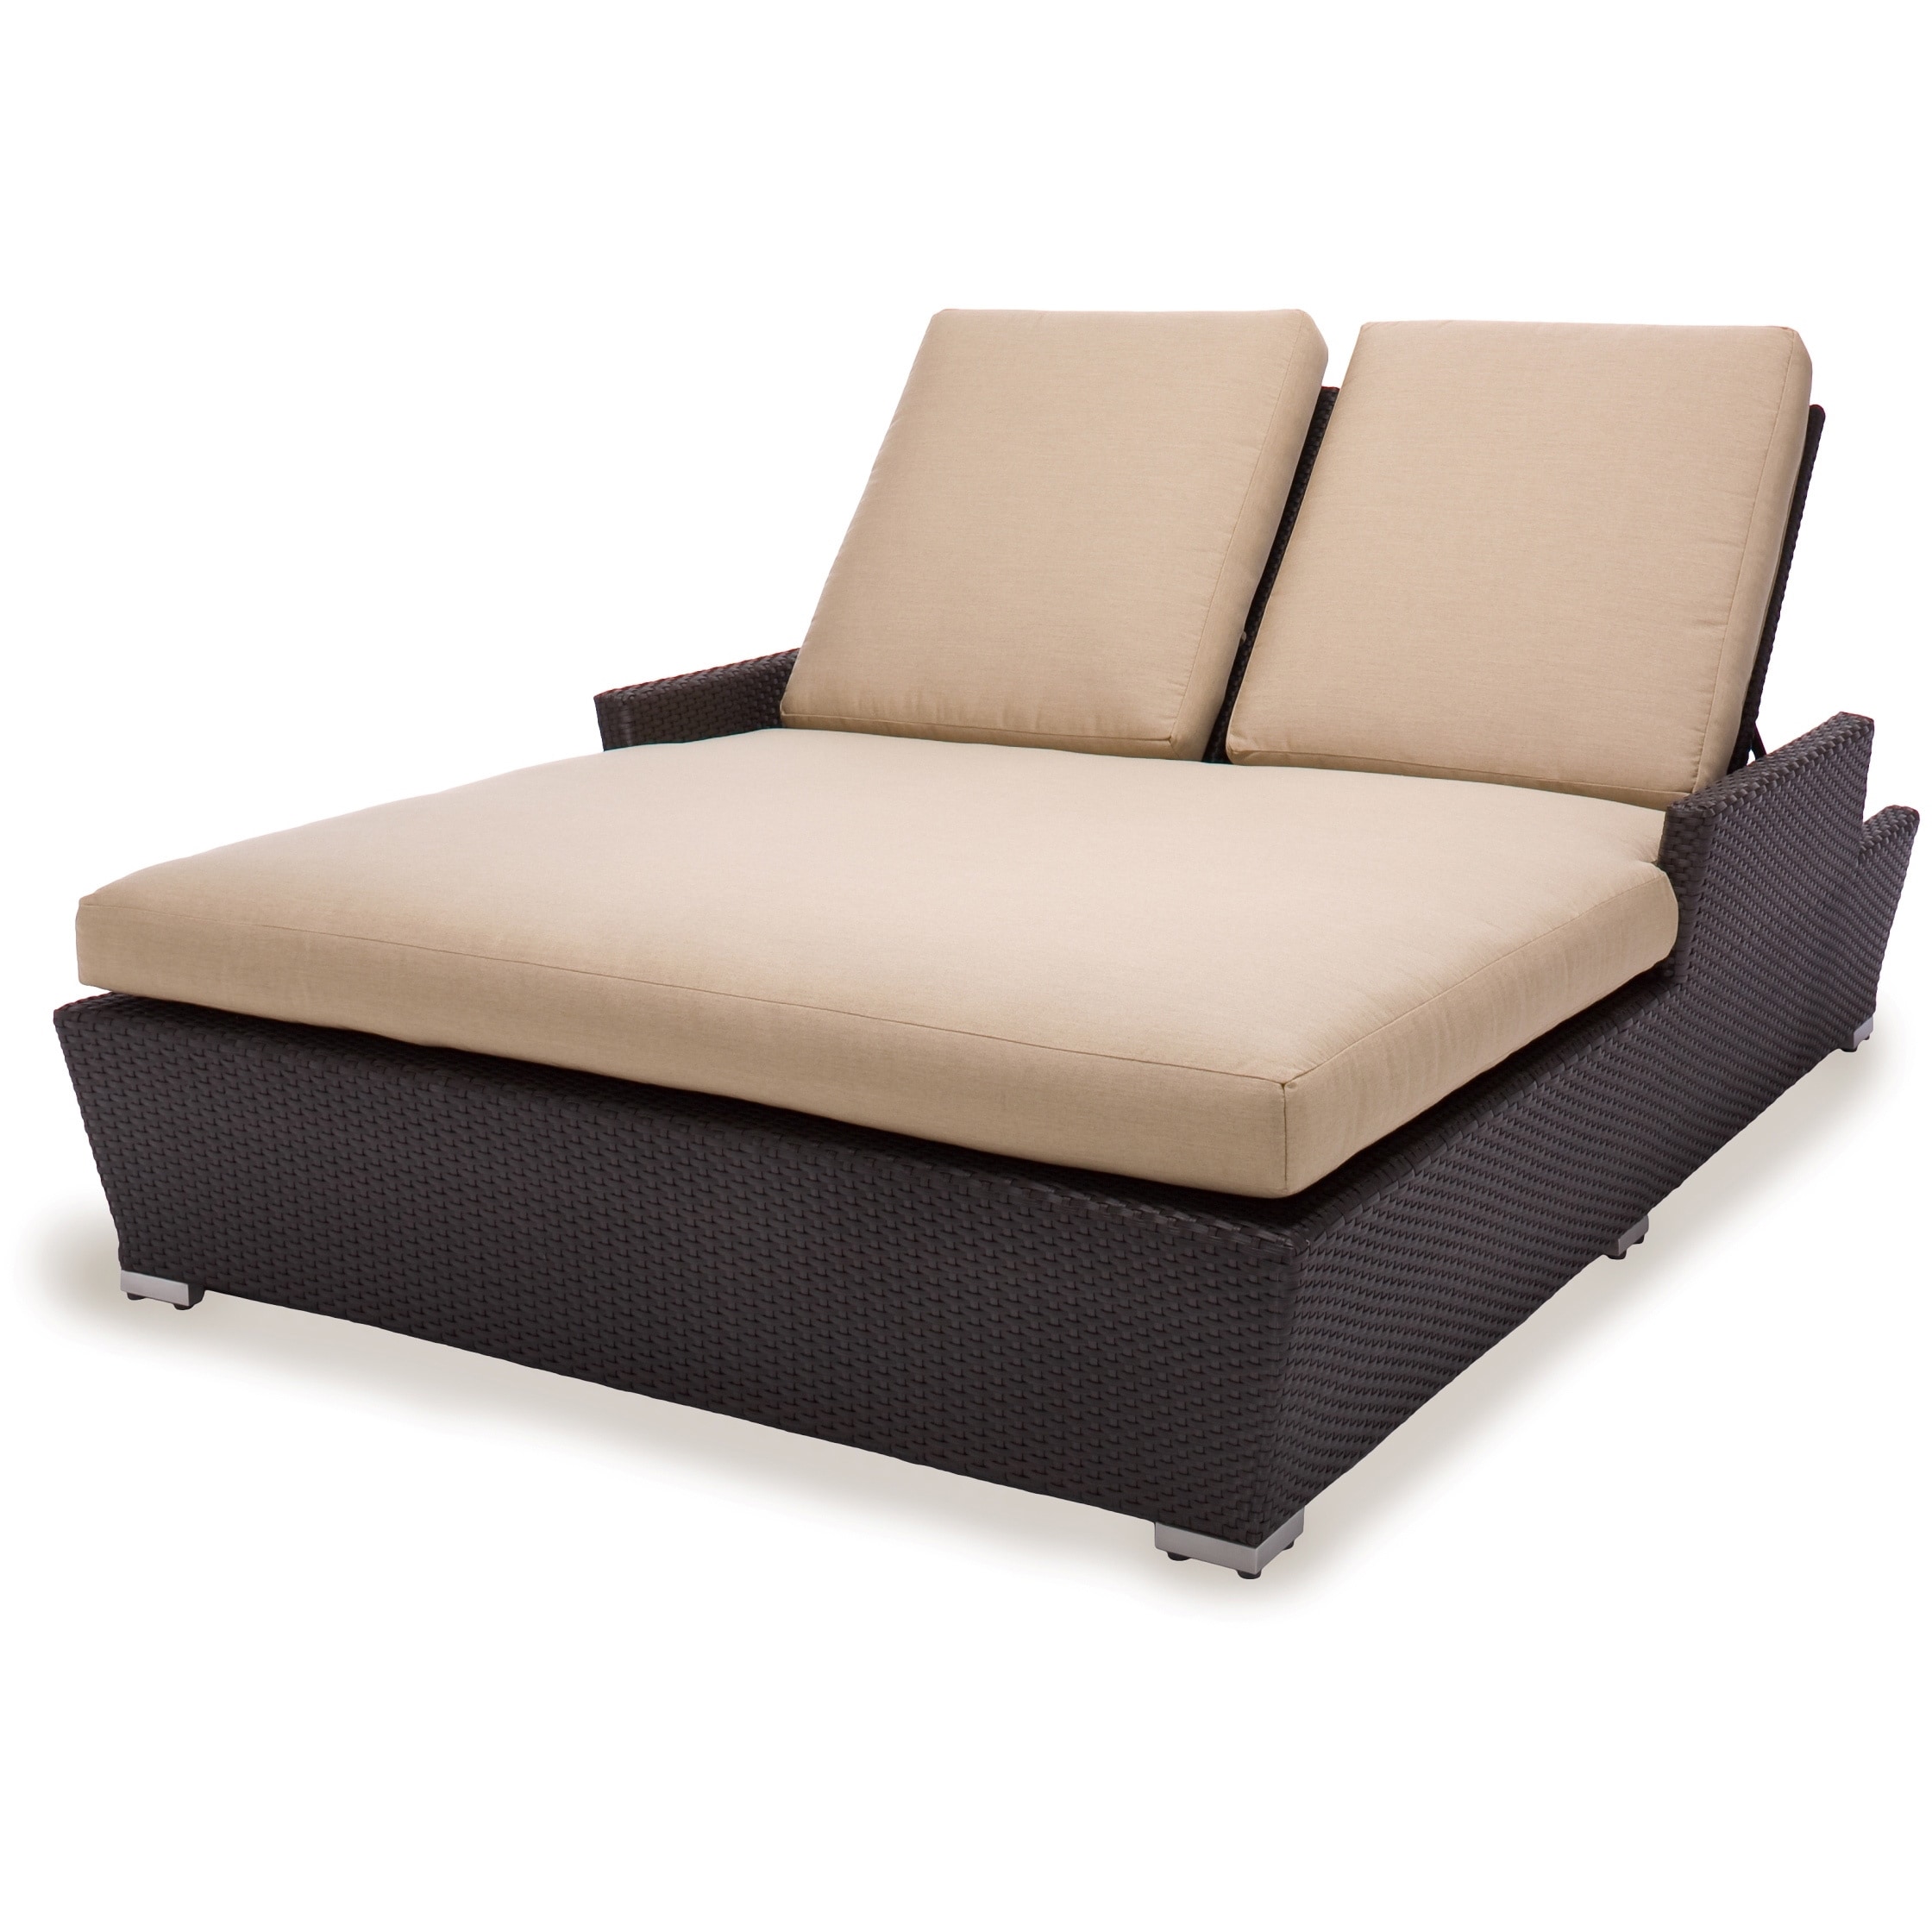 Shop Maxine All Weather Wicker Double Chaise Lounger Free